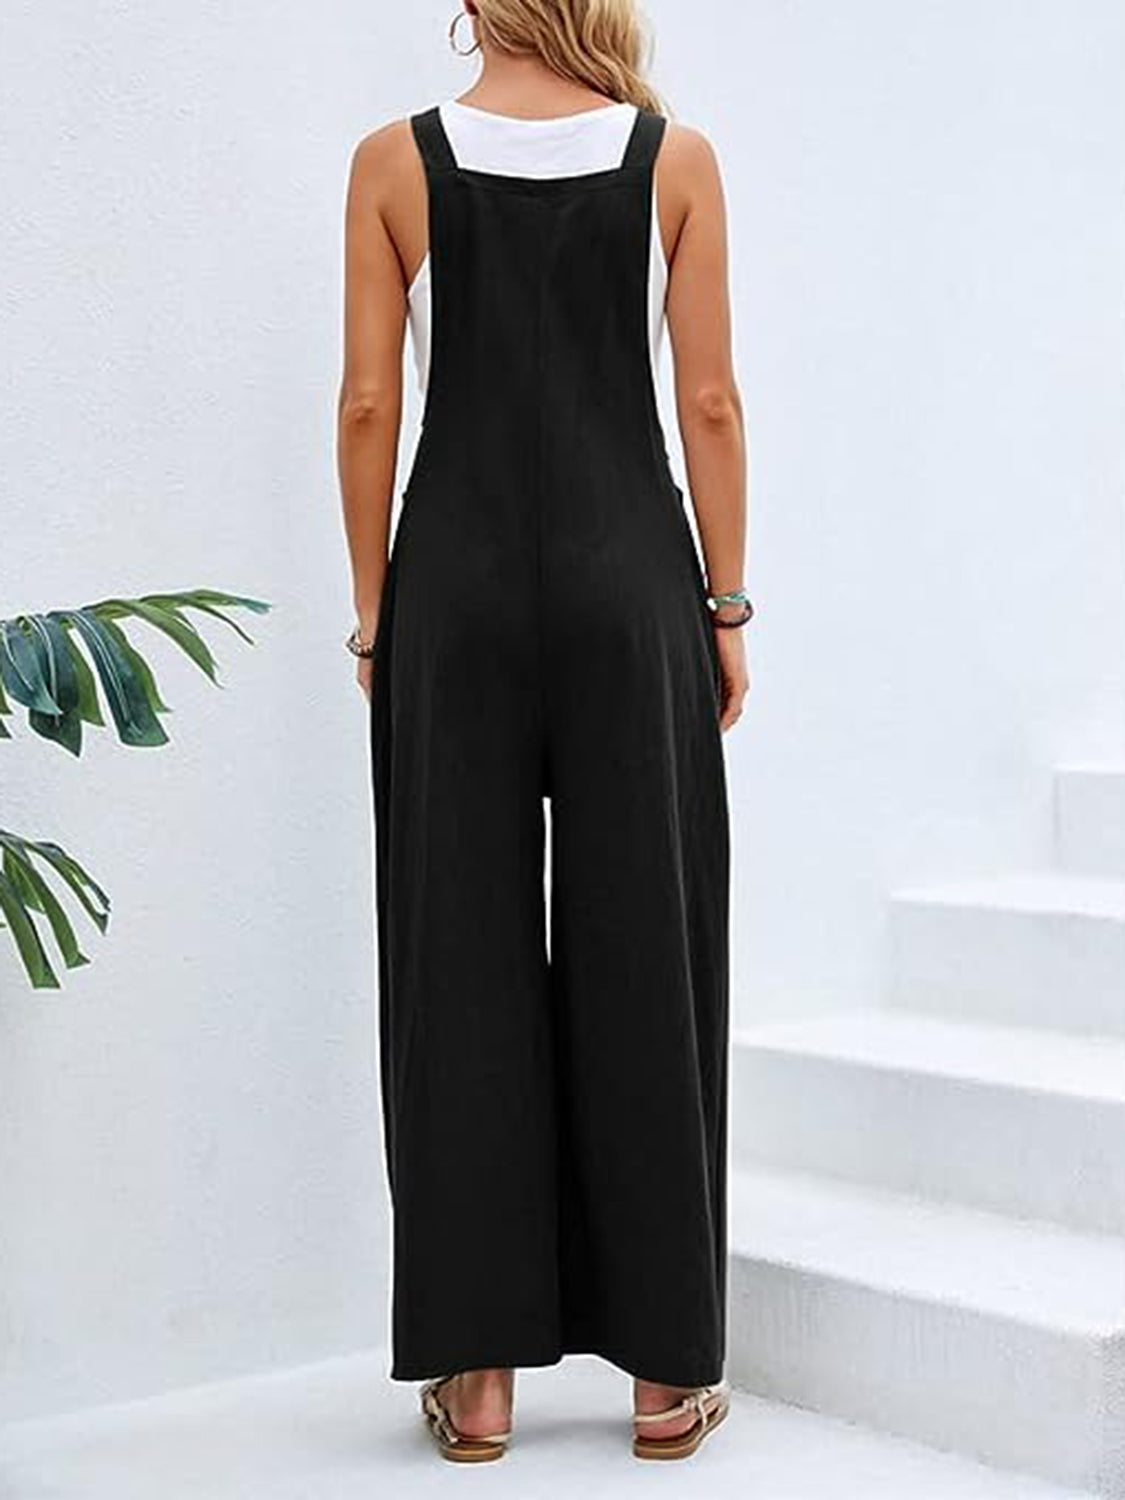 Wide Leg Overalls with Pockets - Bottoms - Overalls - 6 - 2024